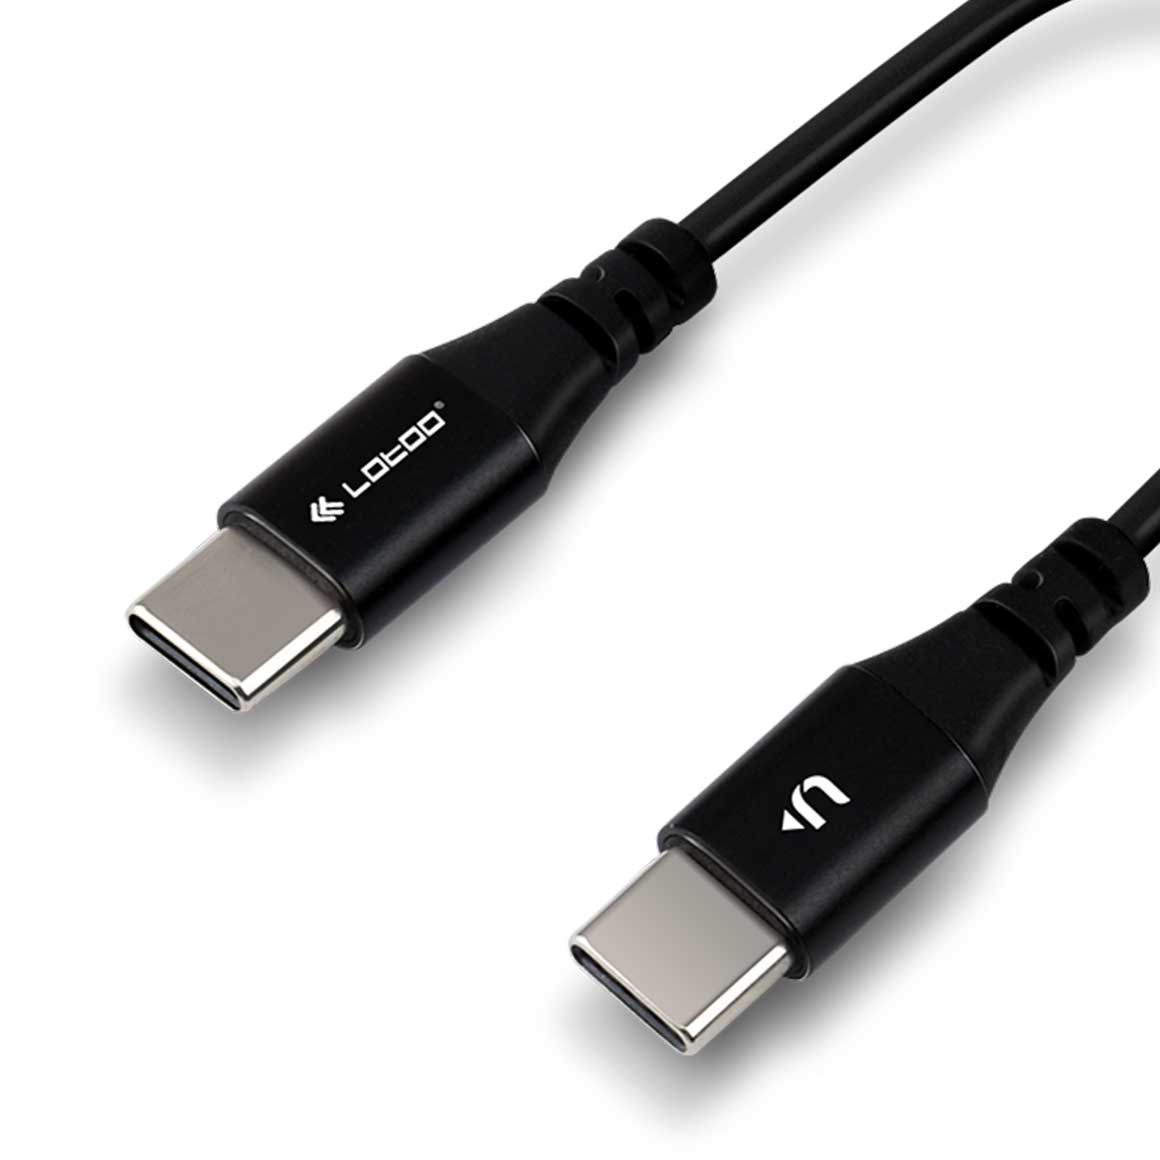 Lotoo - PAW S1 Type-C to Type-C OTG Cable